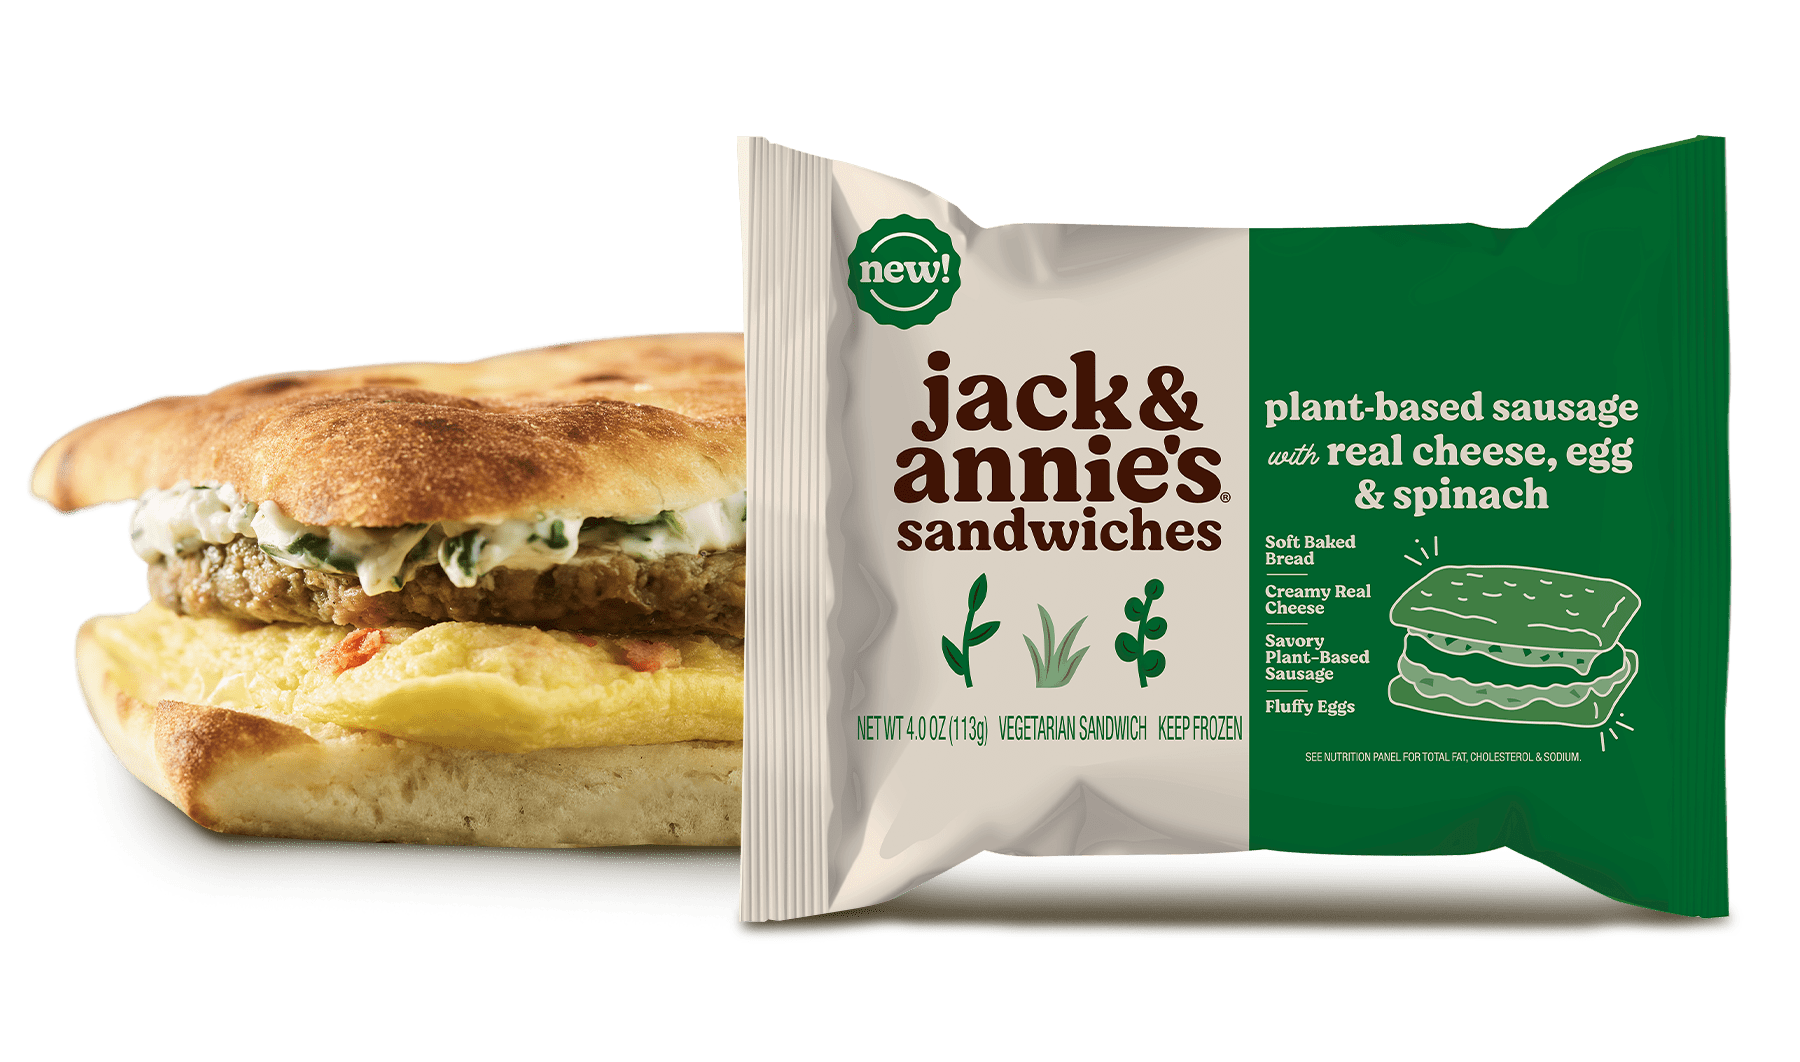 Jack & Annie's Vegetarian Breakfast Sandwich - Spinach, Egg, Cheese and plant-based sausage